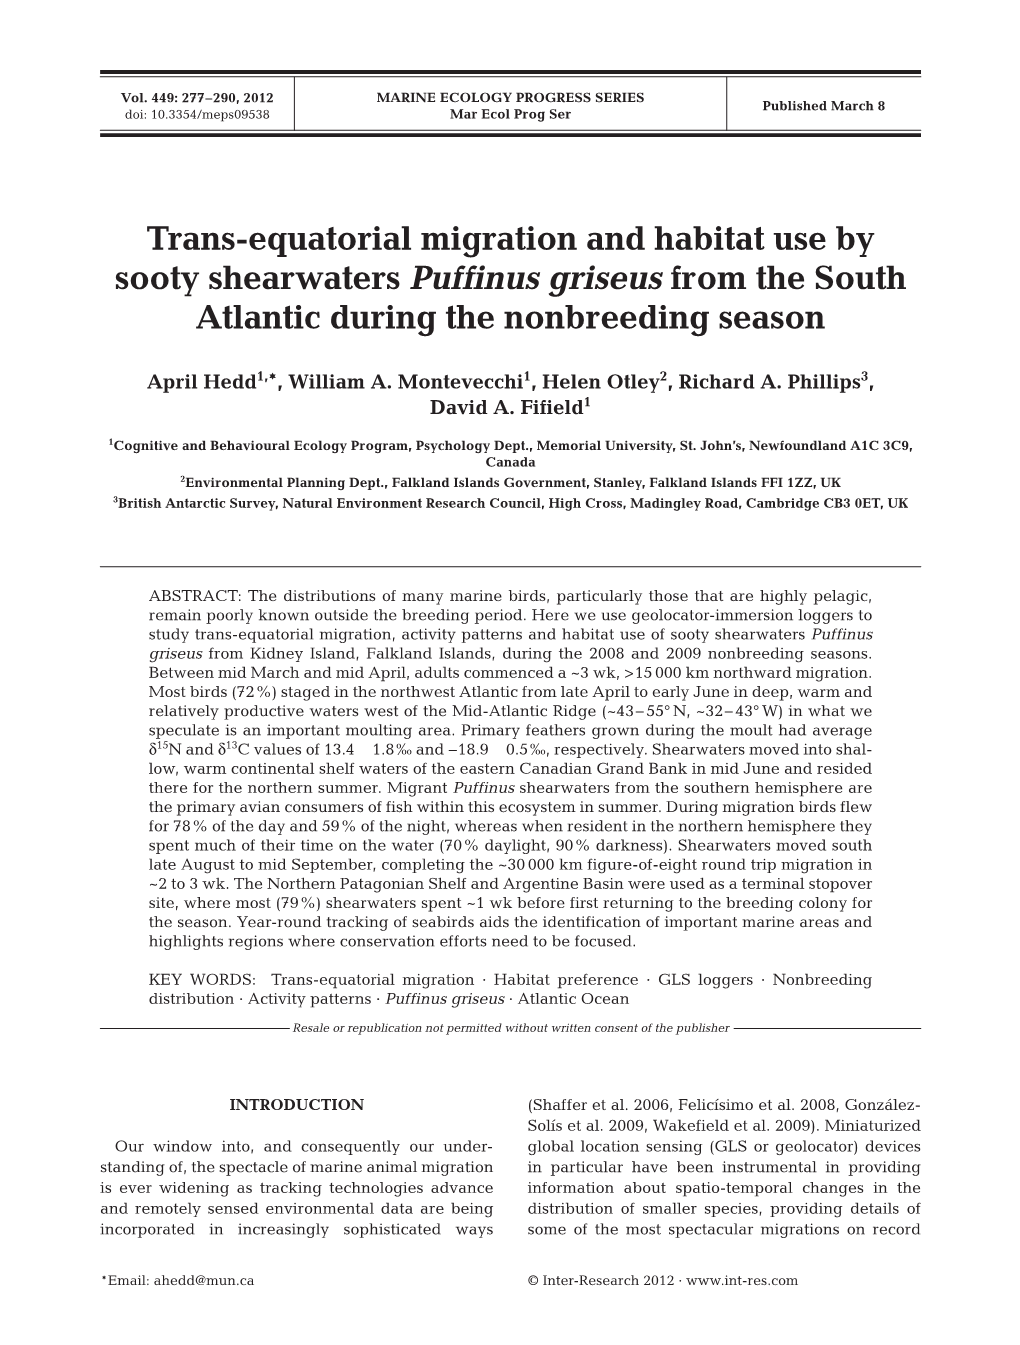 Trans-Equatorial Migration and Habitat Use by Sooty Shearwaters Puffinus Griseus from the South Atlantic During the Nonbreeding Season